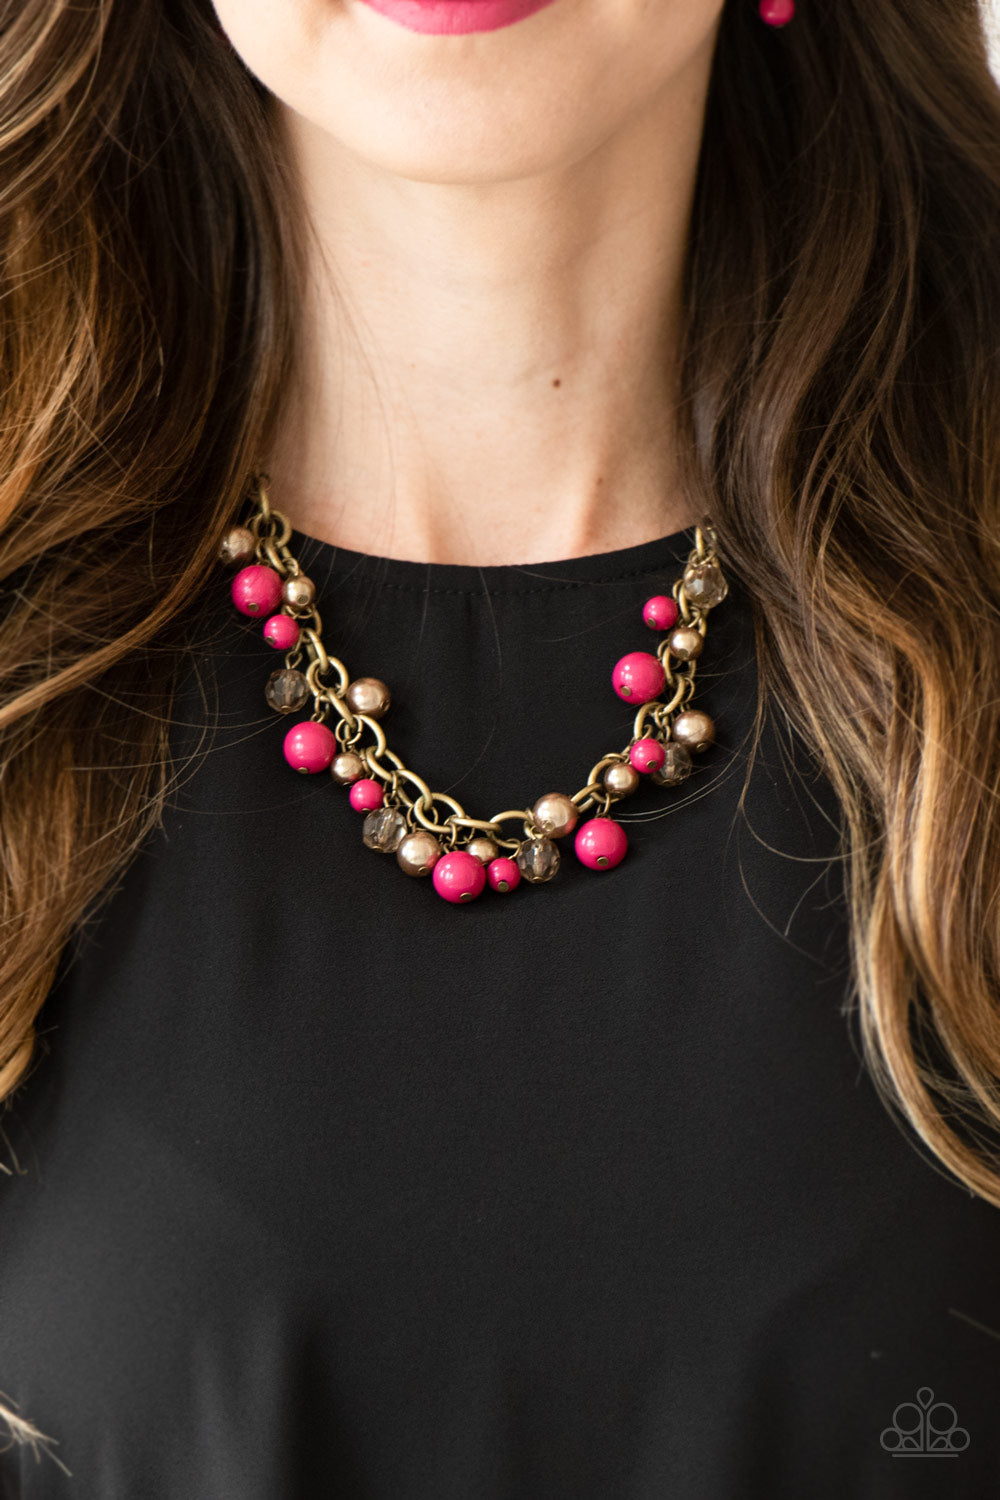 Paparazzi Accessories The GRIT Crowd - Pink Necklace & Earrings 